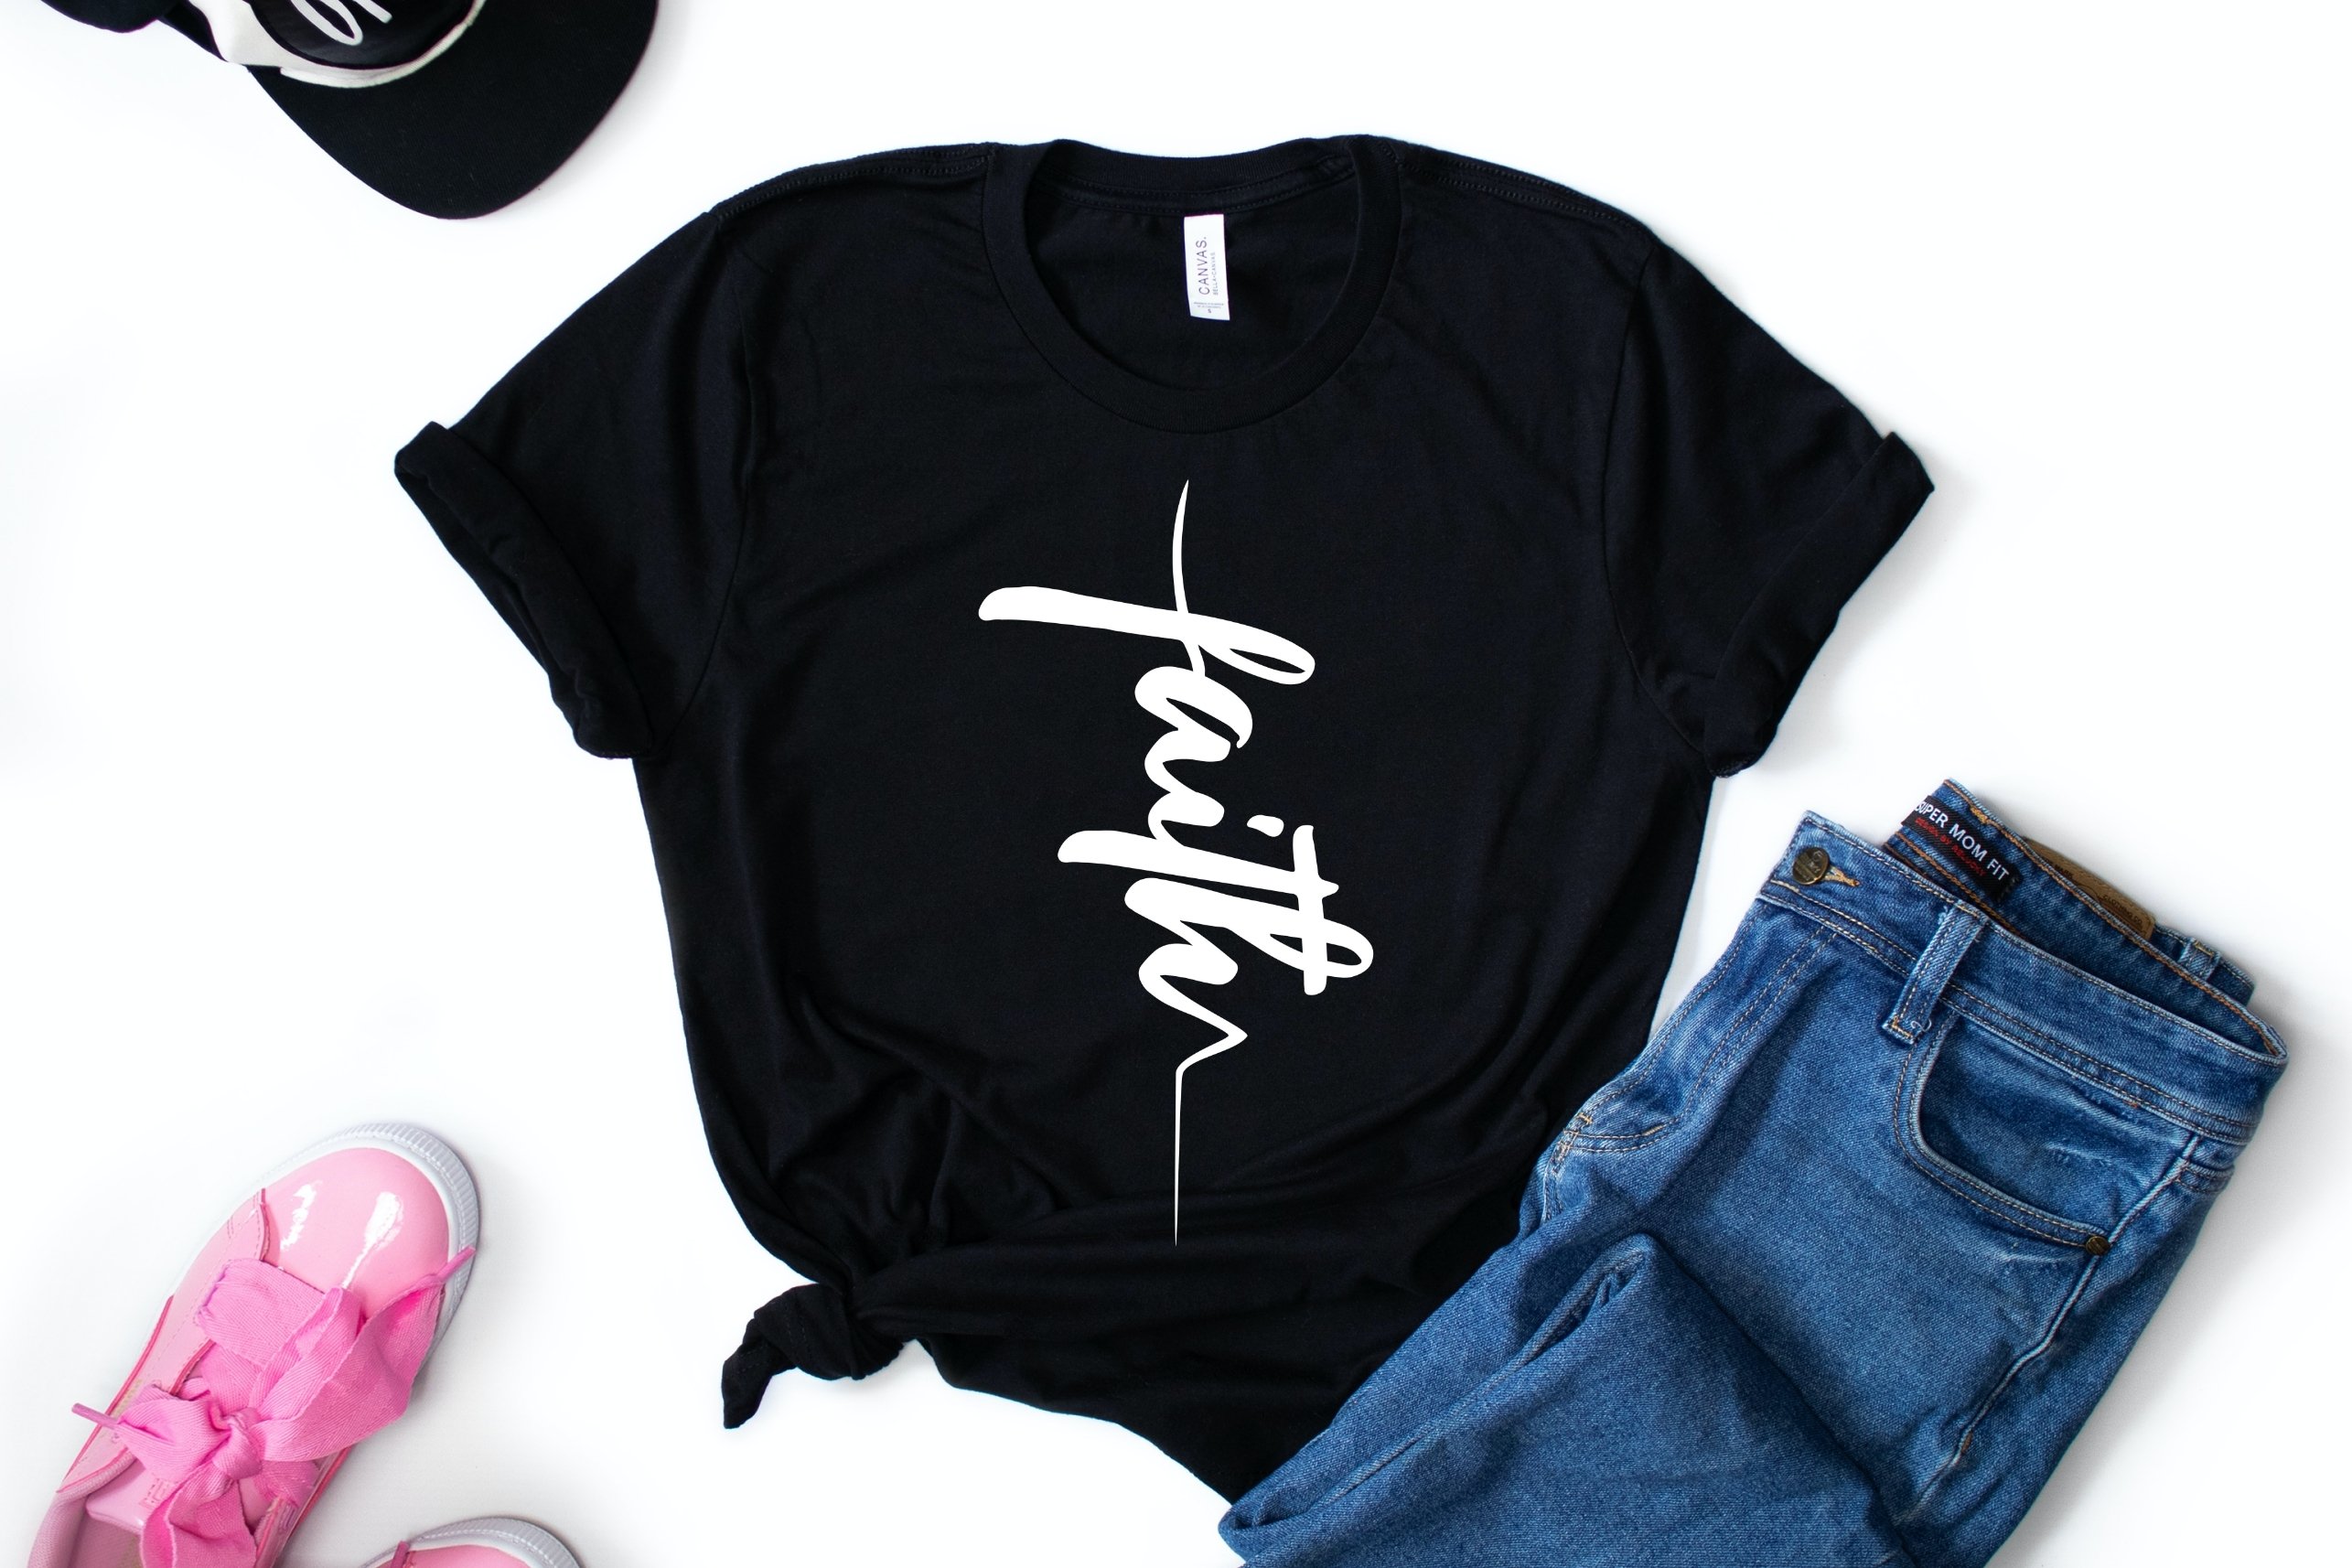 Lettering in white on a black T-shirt.